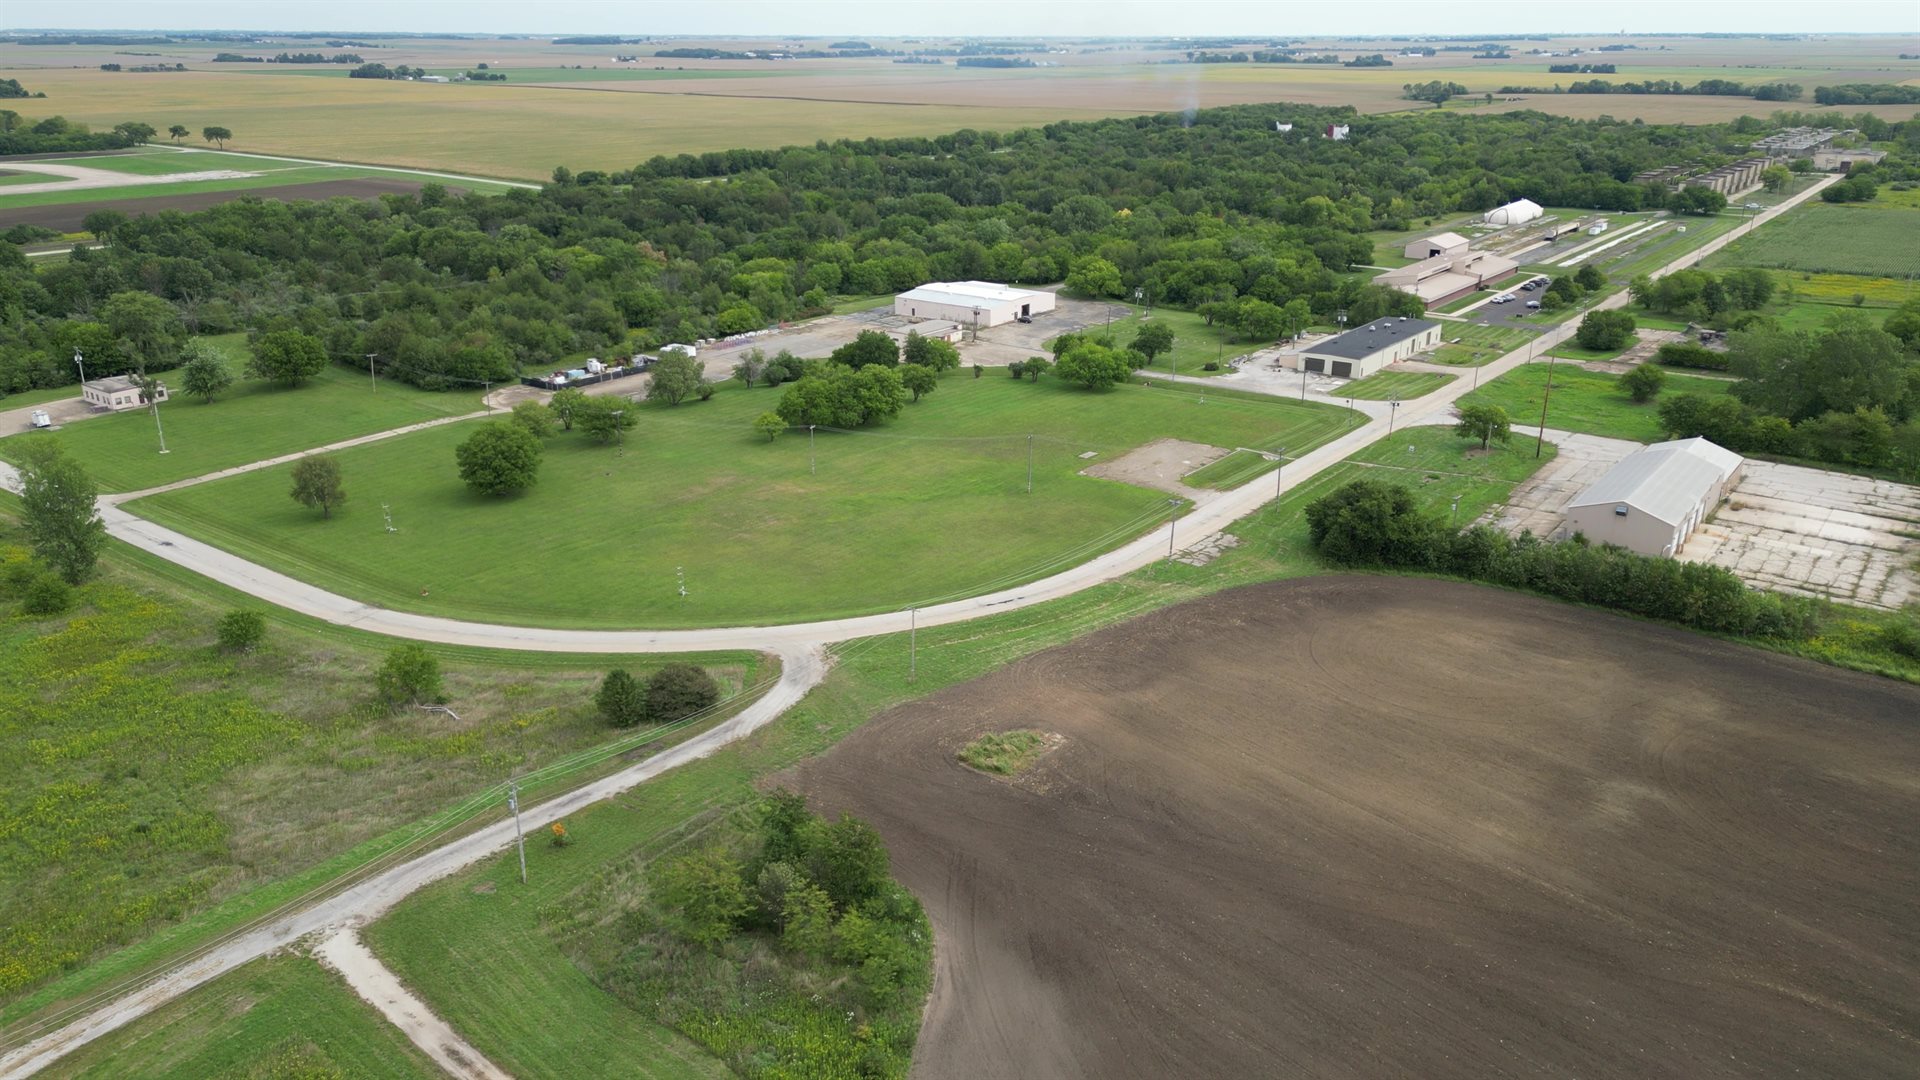 [cr][lf]&amp;amp;amp;amp;amp;amp;lt;p&amp;amp;amp;amp;amp;amp;gt;An overview of the future site of the Illinois Autonomous and Connected Track in Rantoul, Illinois. The site, located on the former Chanute Air Force Base, currently houses the Illinois Center for Transportation.&amp;amp;amp;amp;amp;amp;lt;/p&amp;amp;amp;amp;amp;amp;gt;[cr][lf]